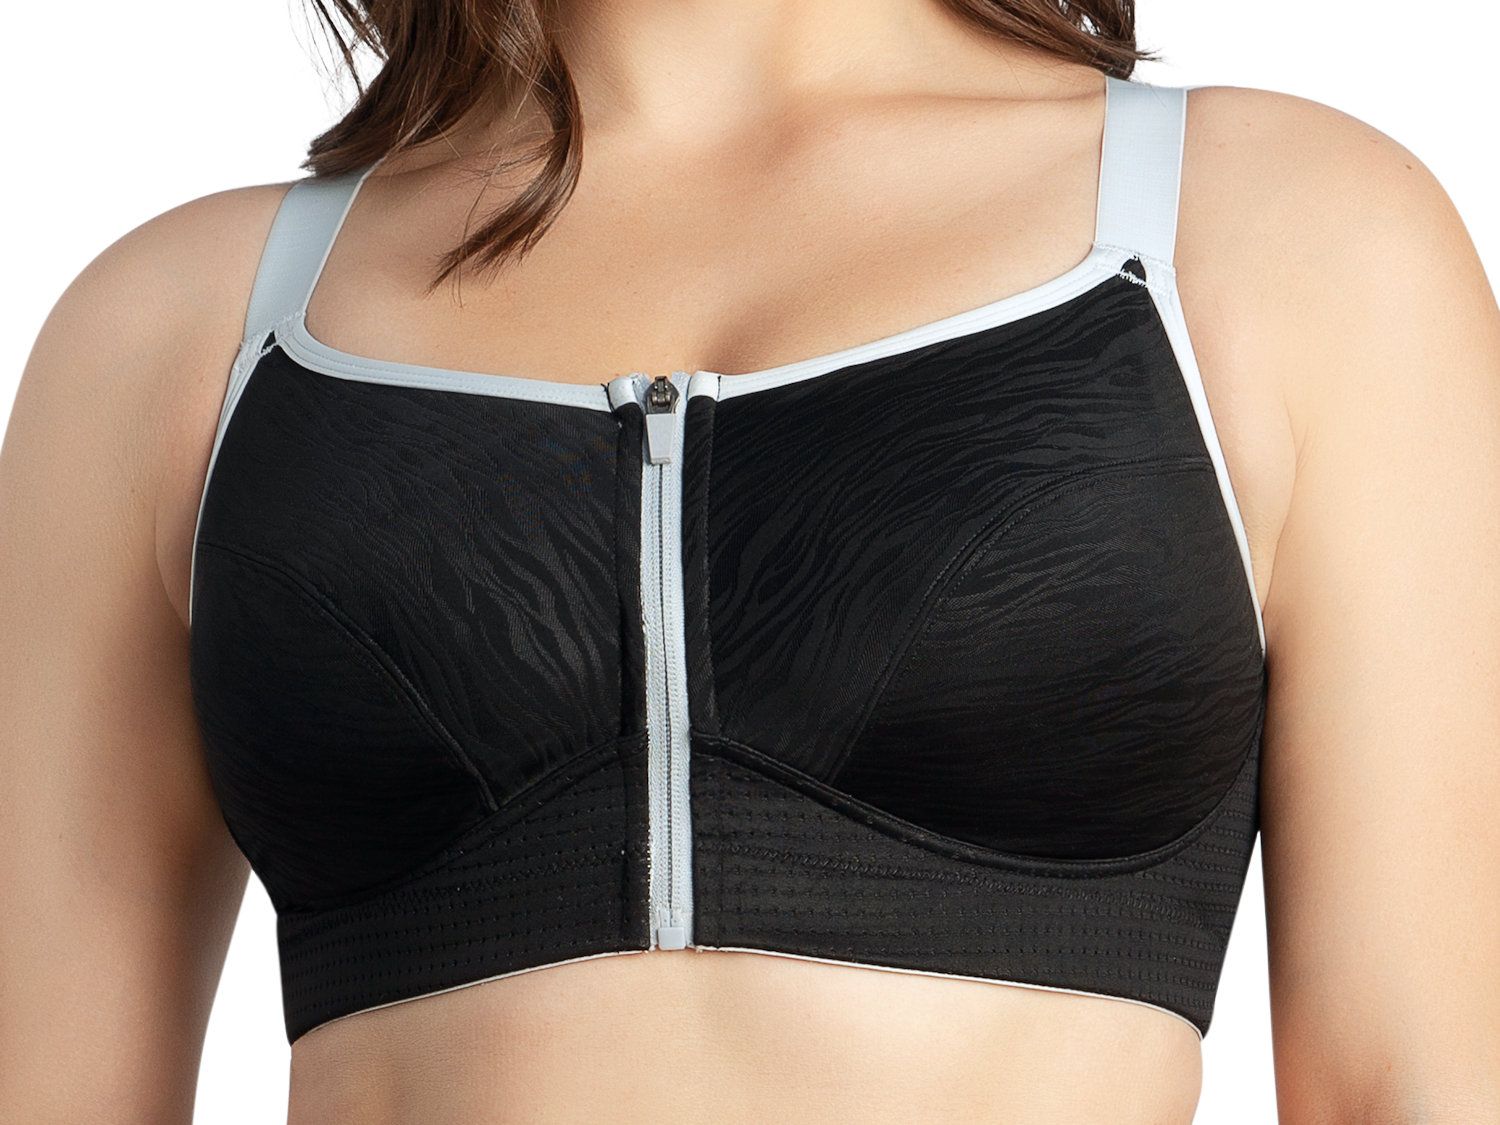 Bra-sized Non-Wired Sports Swimsuits in D-H cup